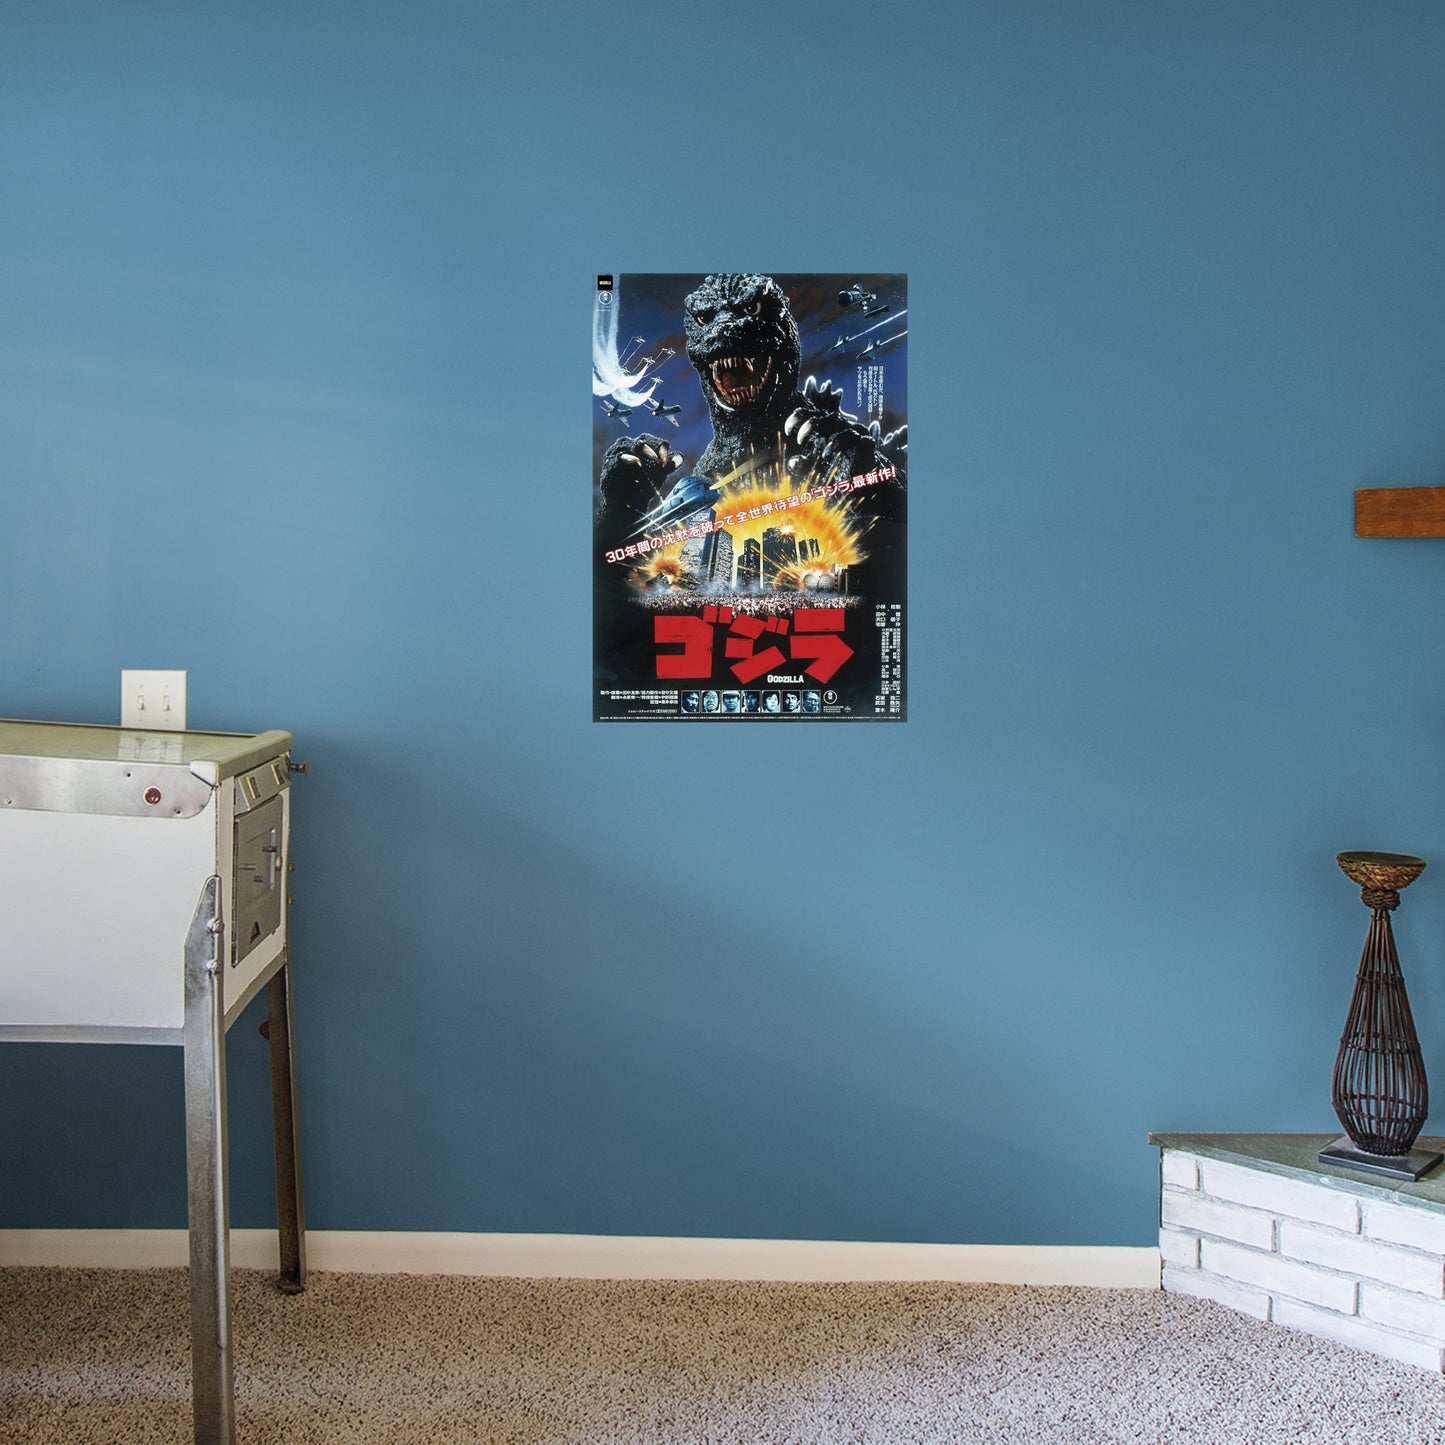 Godzilla: The Return Of Godzilla (1984) Movie Poster Mural - Officially Licensed Toho Removable Adhesive Decal